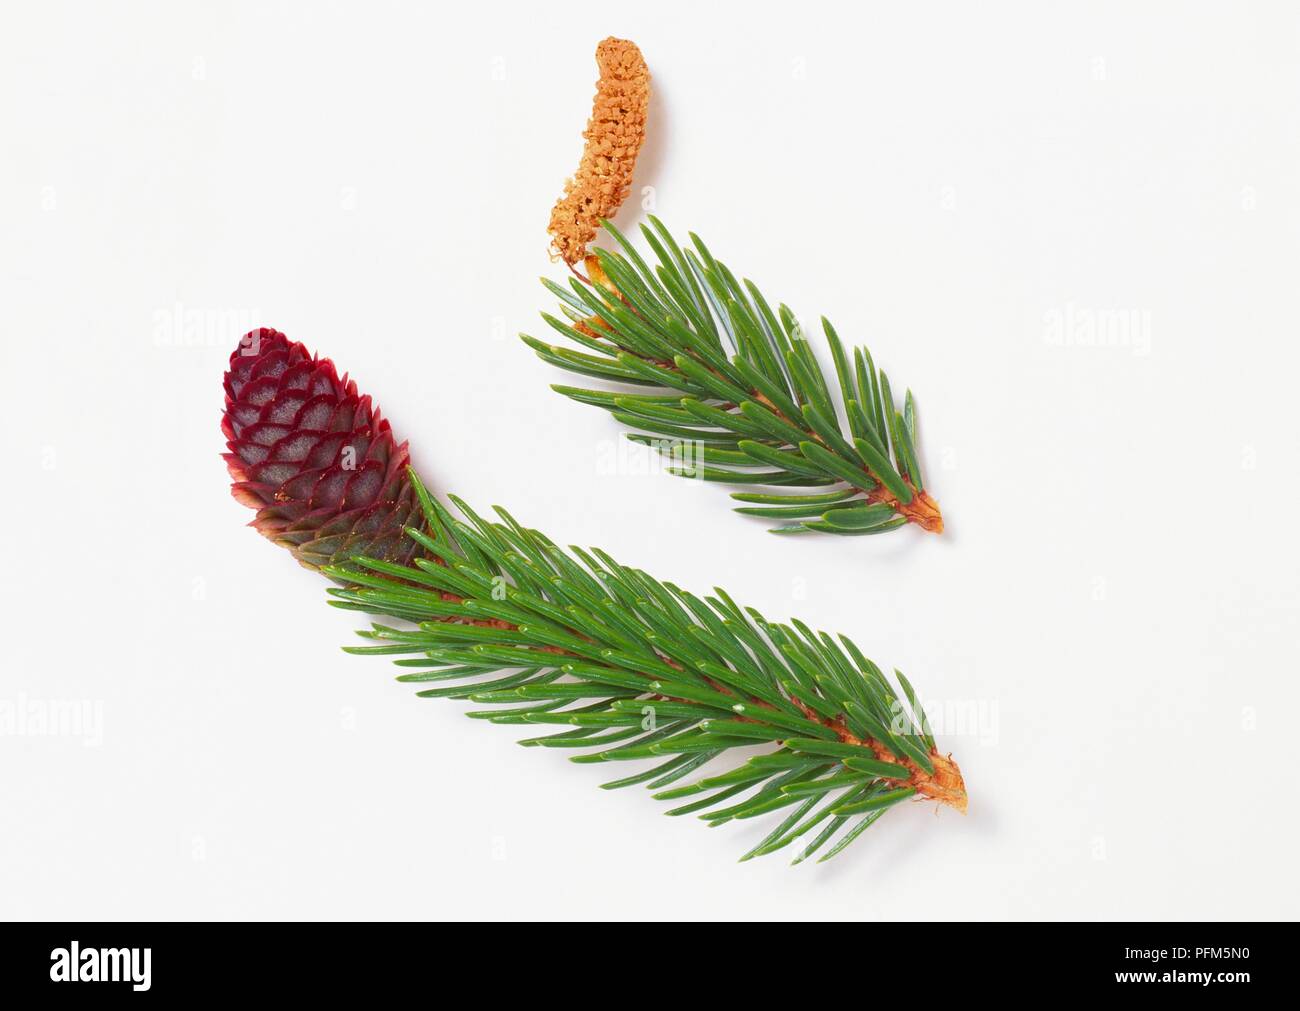 Cone-like female flower and male catkin from Picea jezoensis (Yezo spruce) Stock Photo